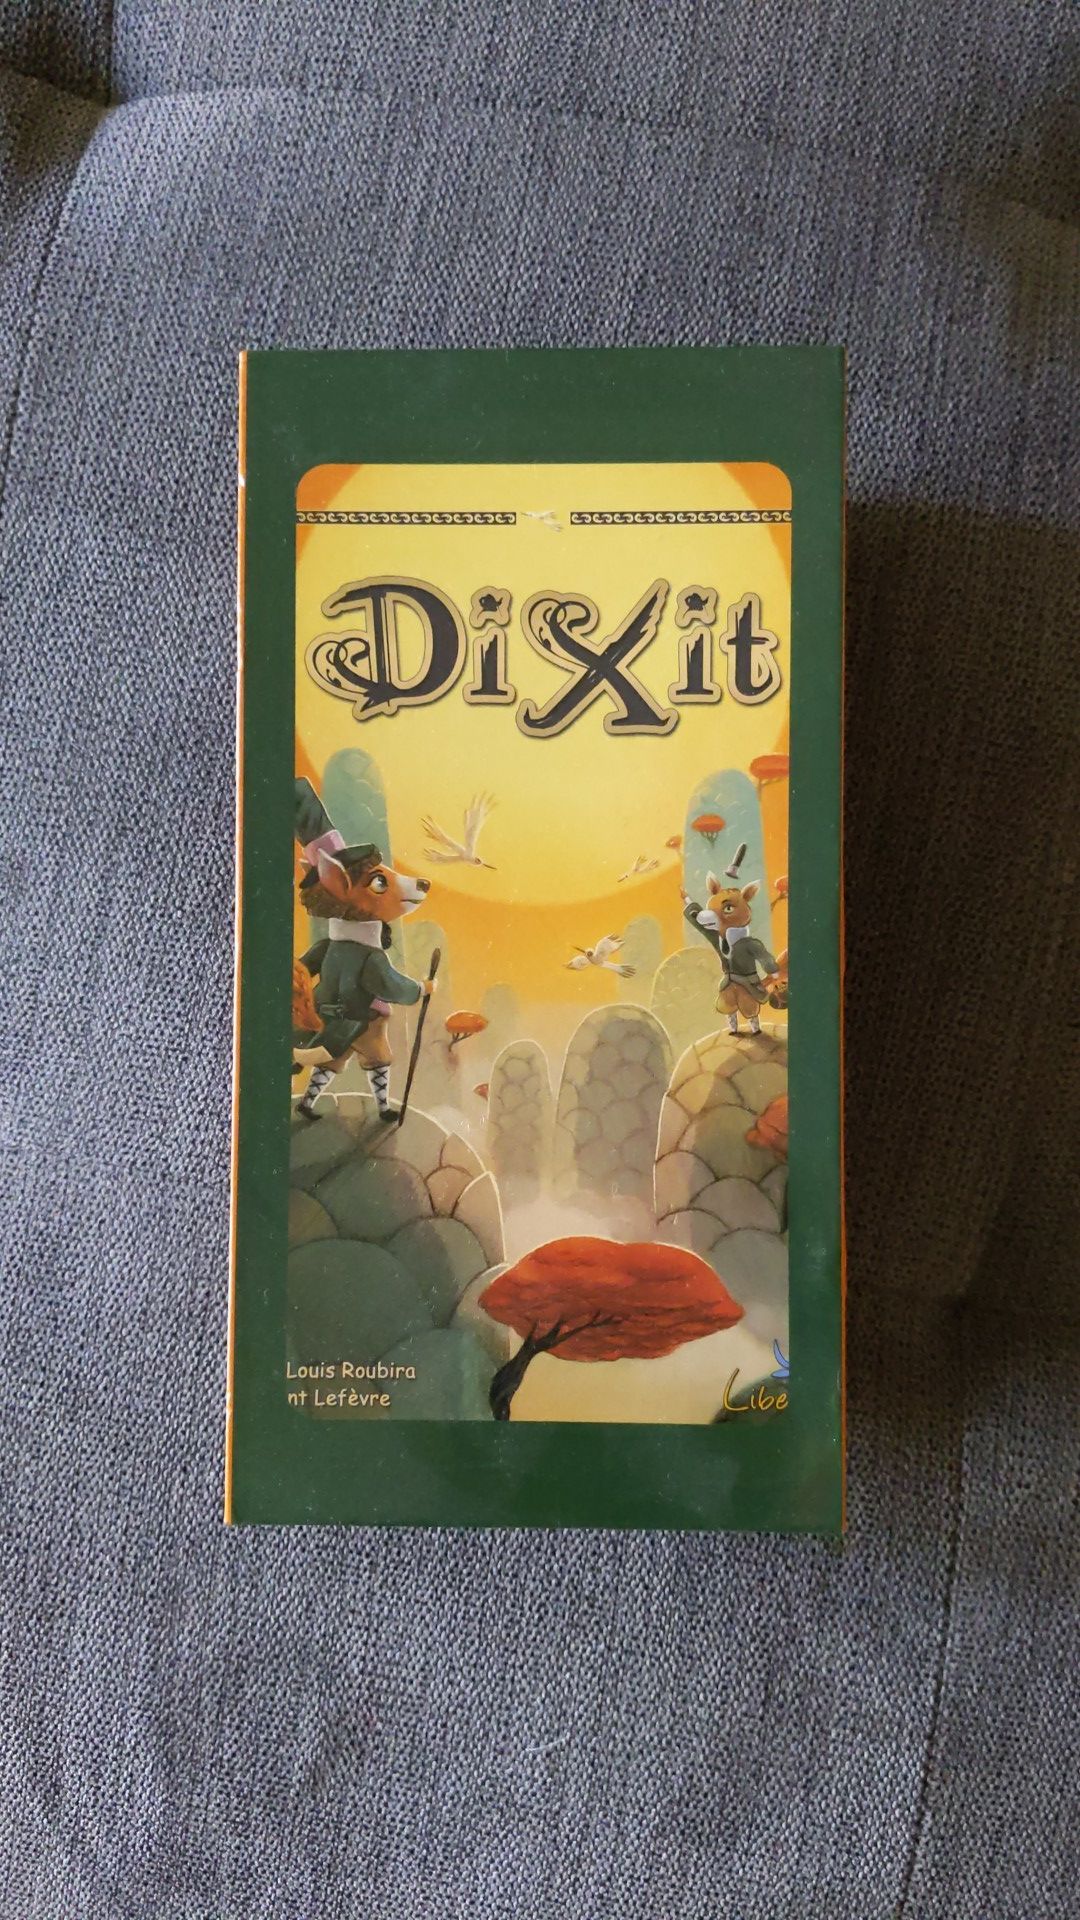 Dixit board game with all the expansion packs